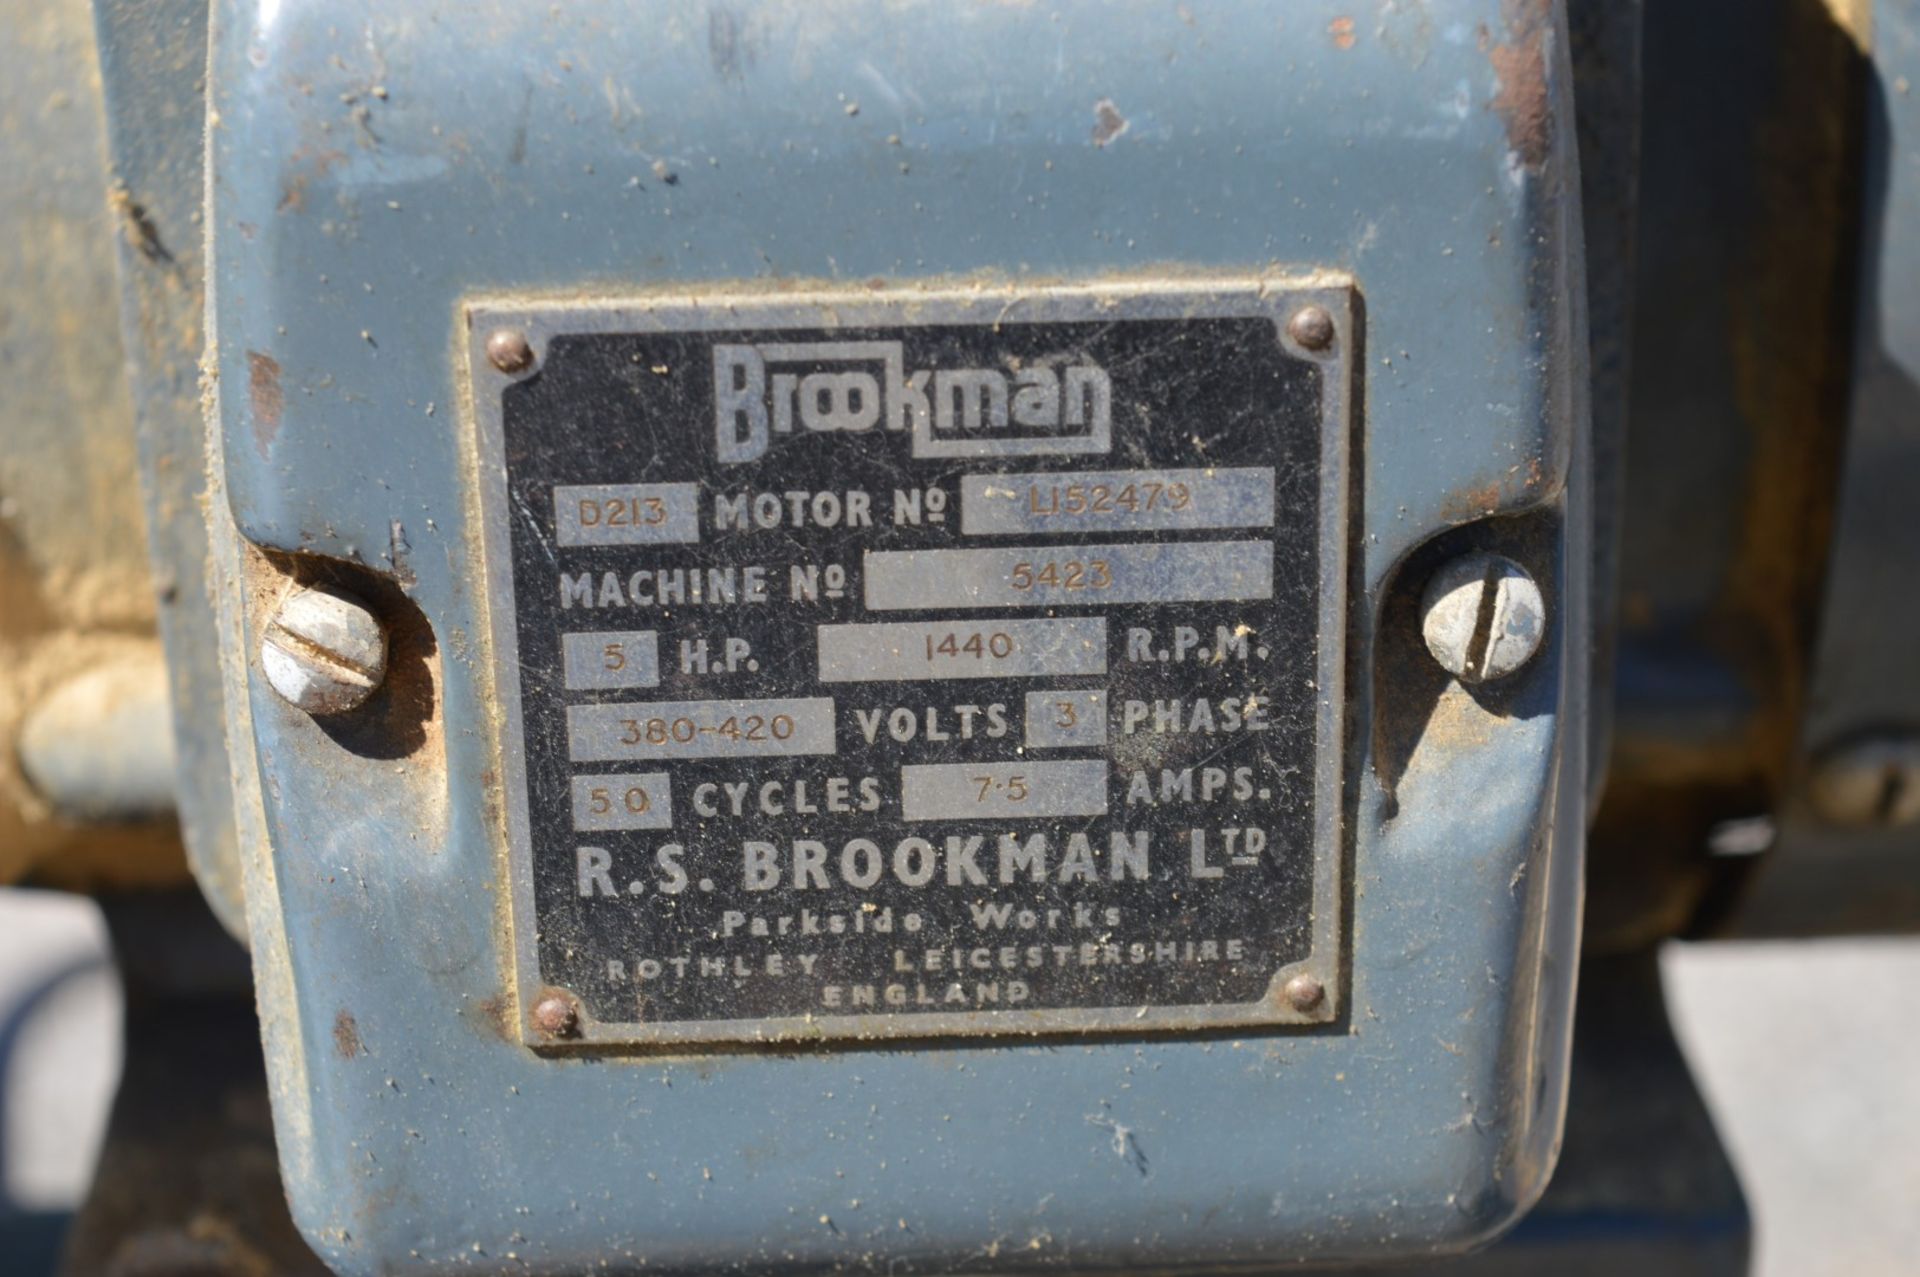 1 x Brookman Dovetailing Machine - Type ADM-1 - Serial No 5423 - 3 Phase - Dimensions H110 x W180 - Image 5 of 12